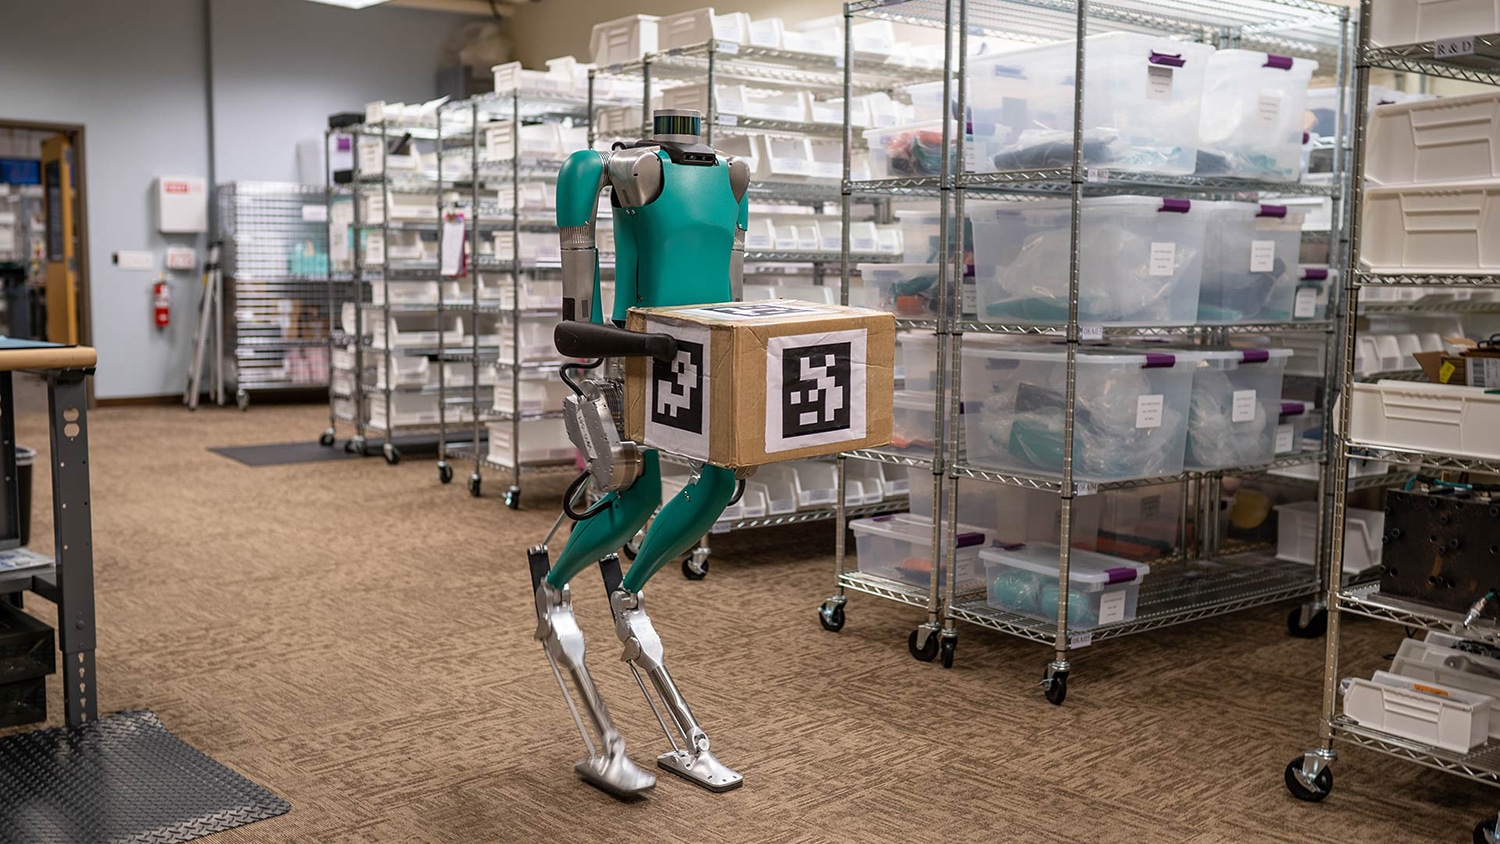 Digit, a robot with arms and legs to work with humans and in human spaces.